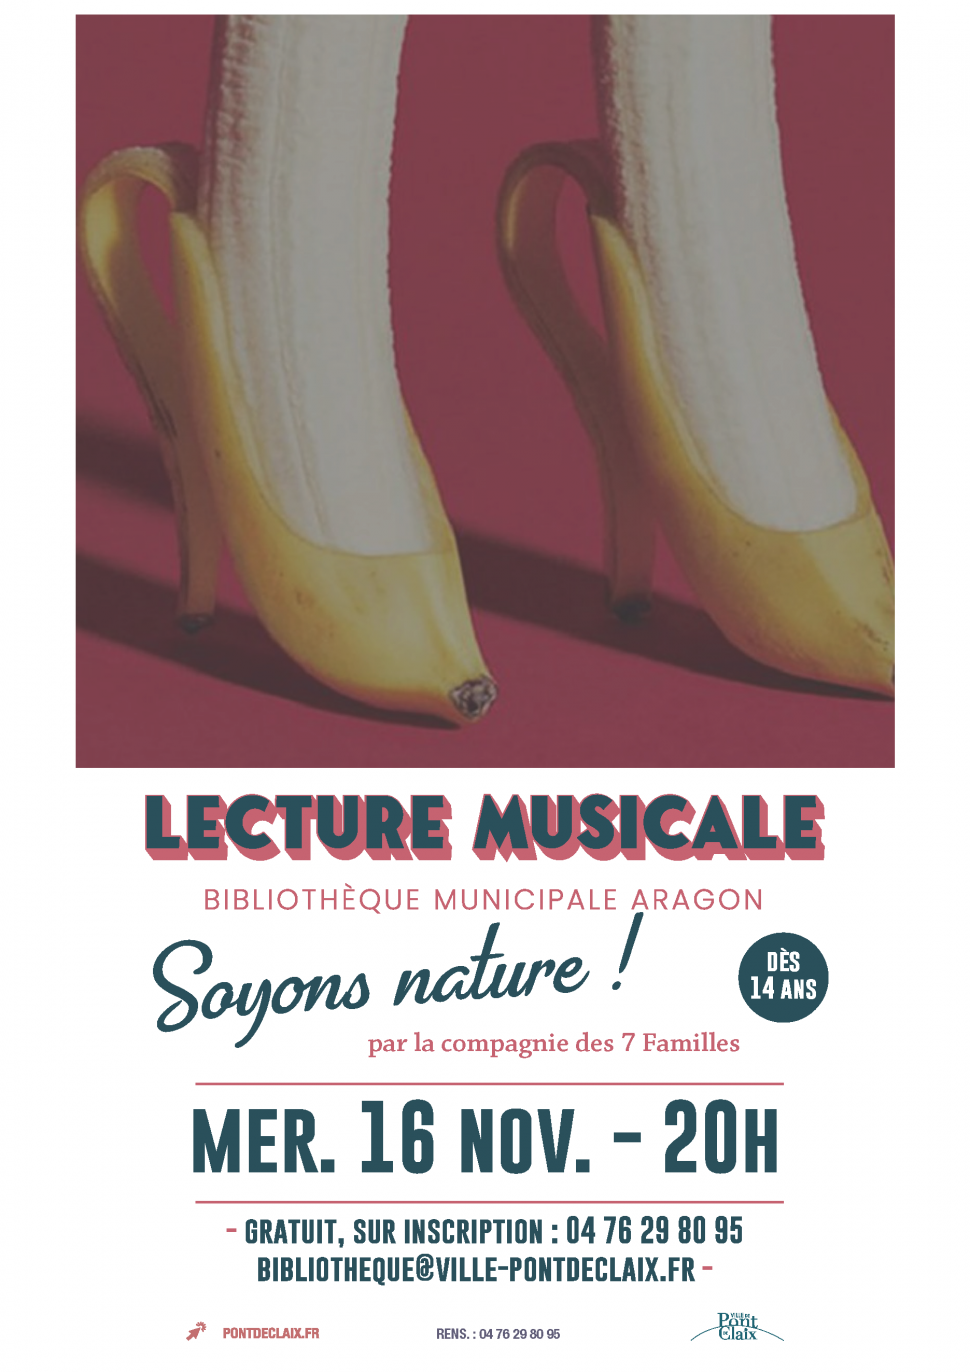 Lecture musicale "Soyons Nature"